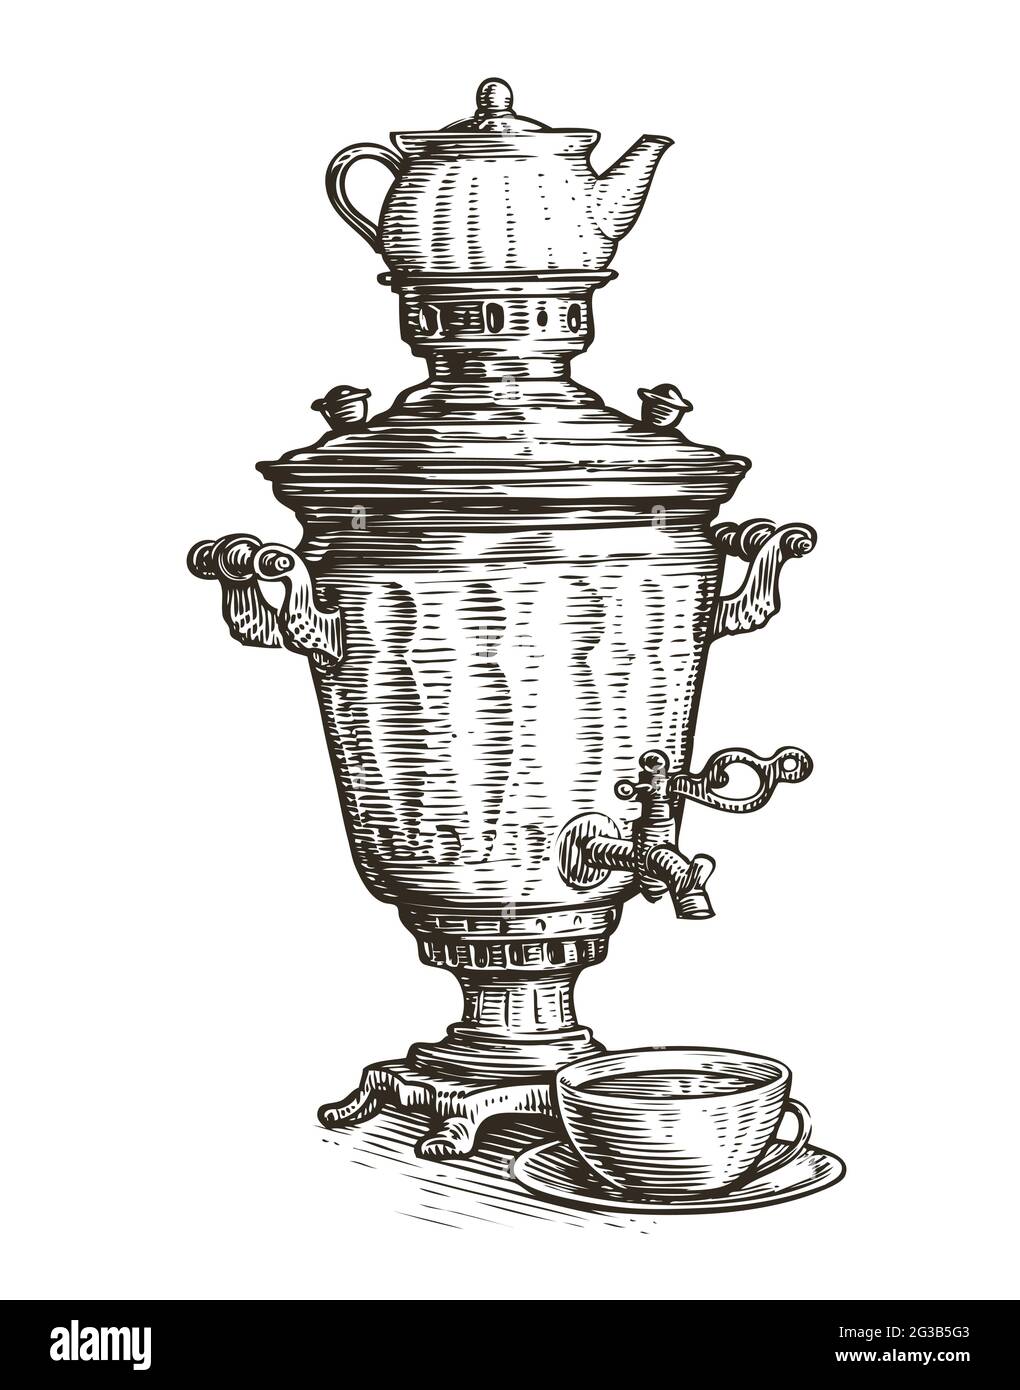 Samovar sketch. Russian traditional old fashioned style of tea drinking. Vintage vector illustration Stock Vector